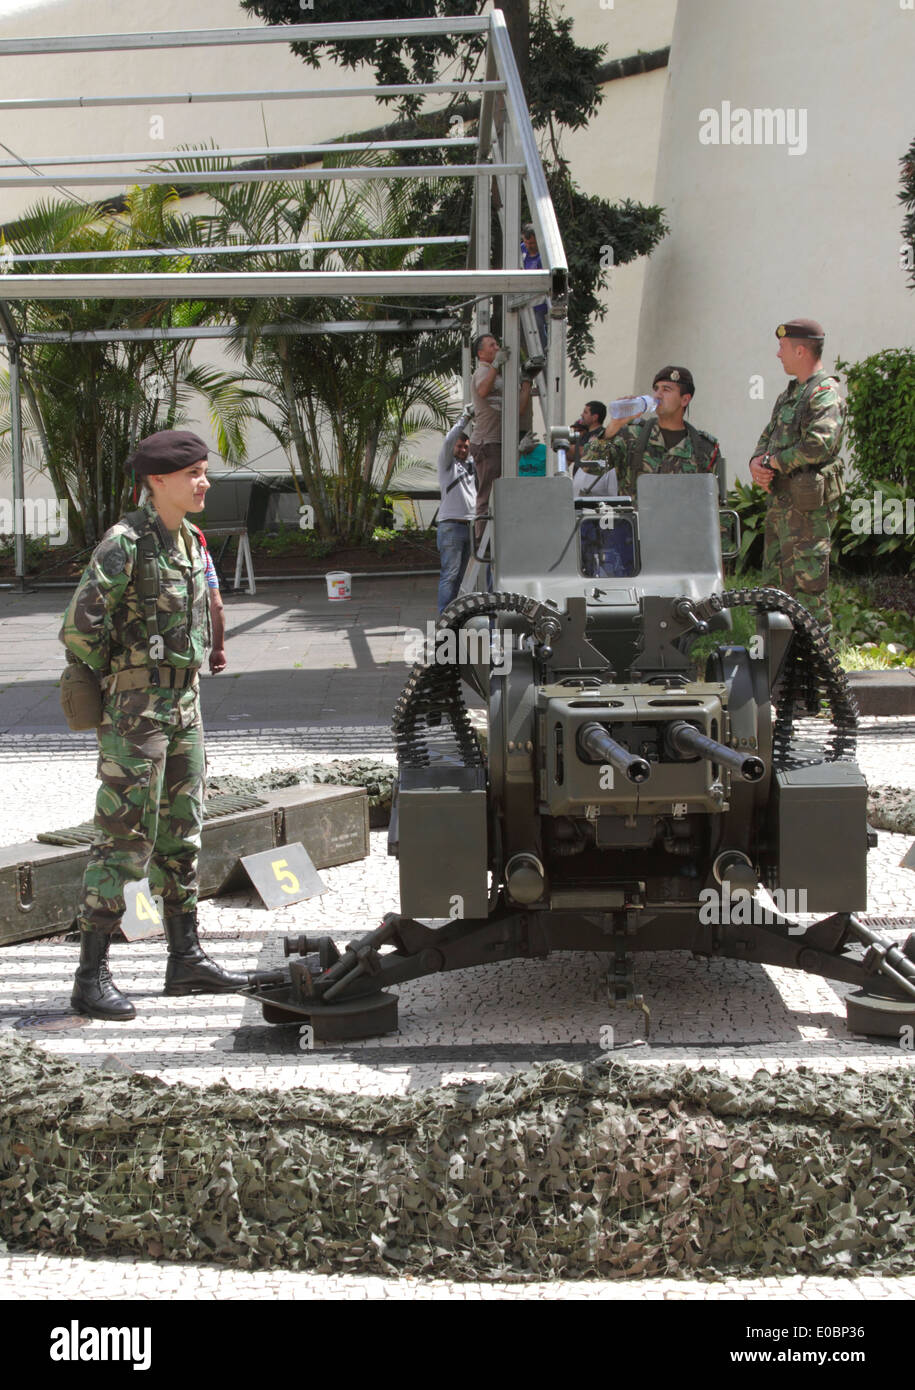 Madeiran military displaying their equipment in Funchal Madeira April 2014 Stock Photo